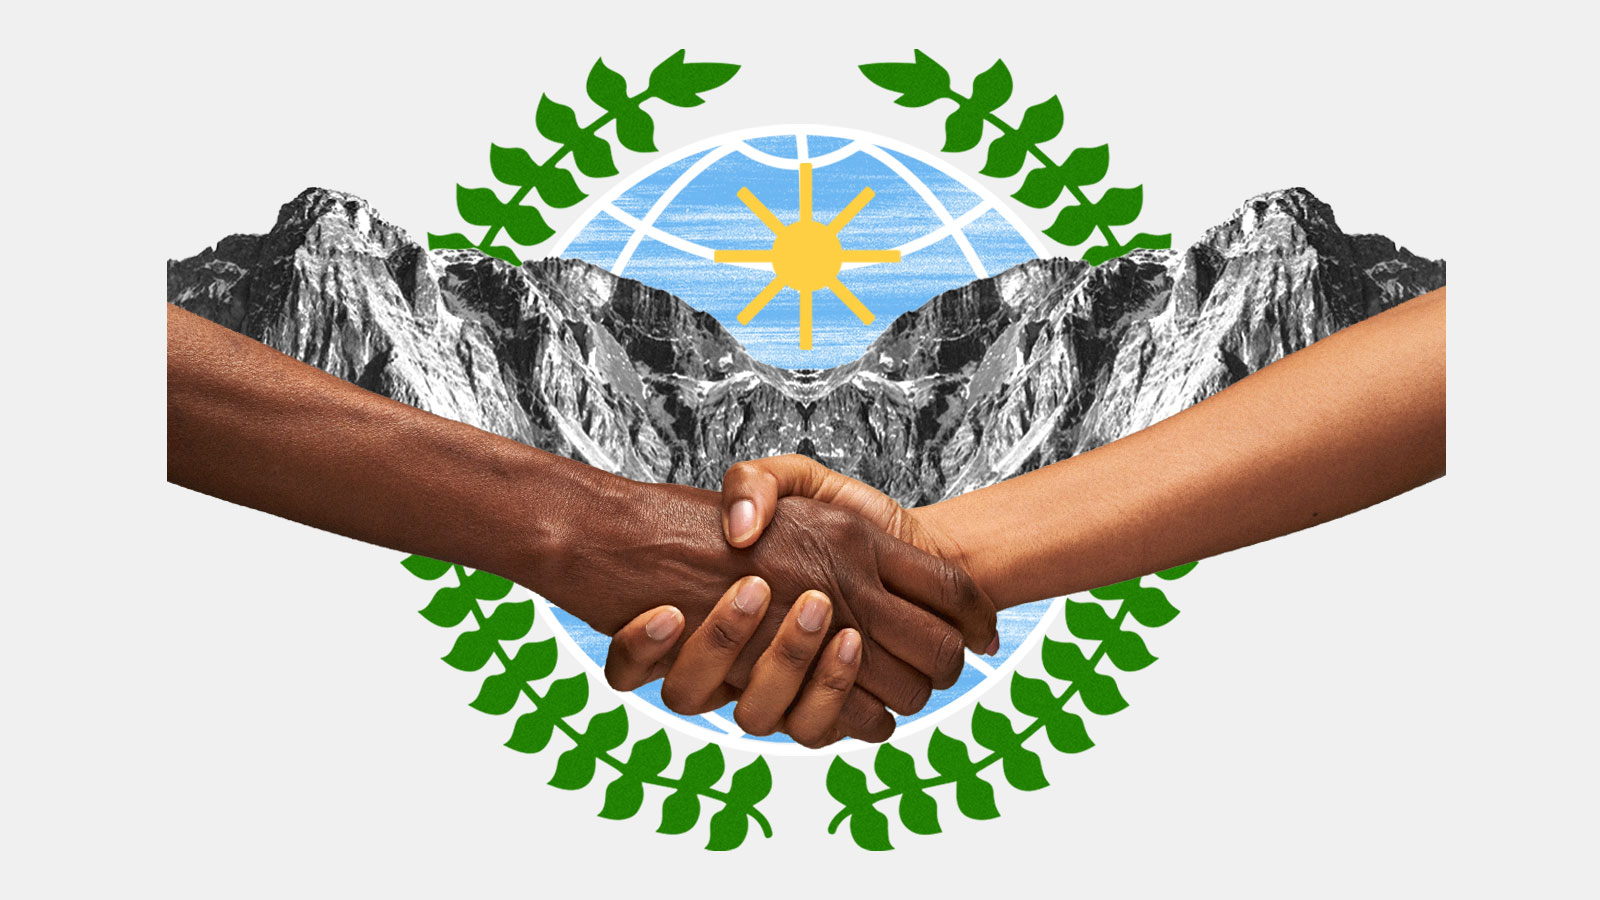 Black and brown arms shaking hands, mountains, globe, and laurel wreath in background